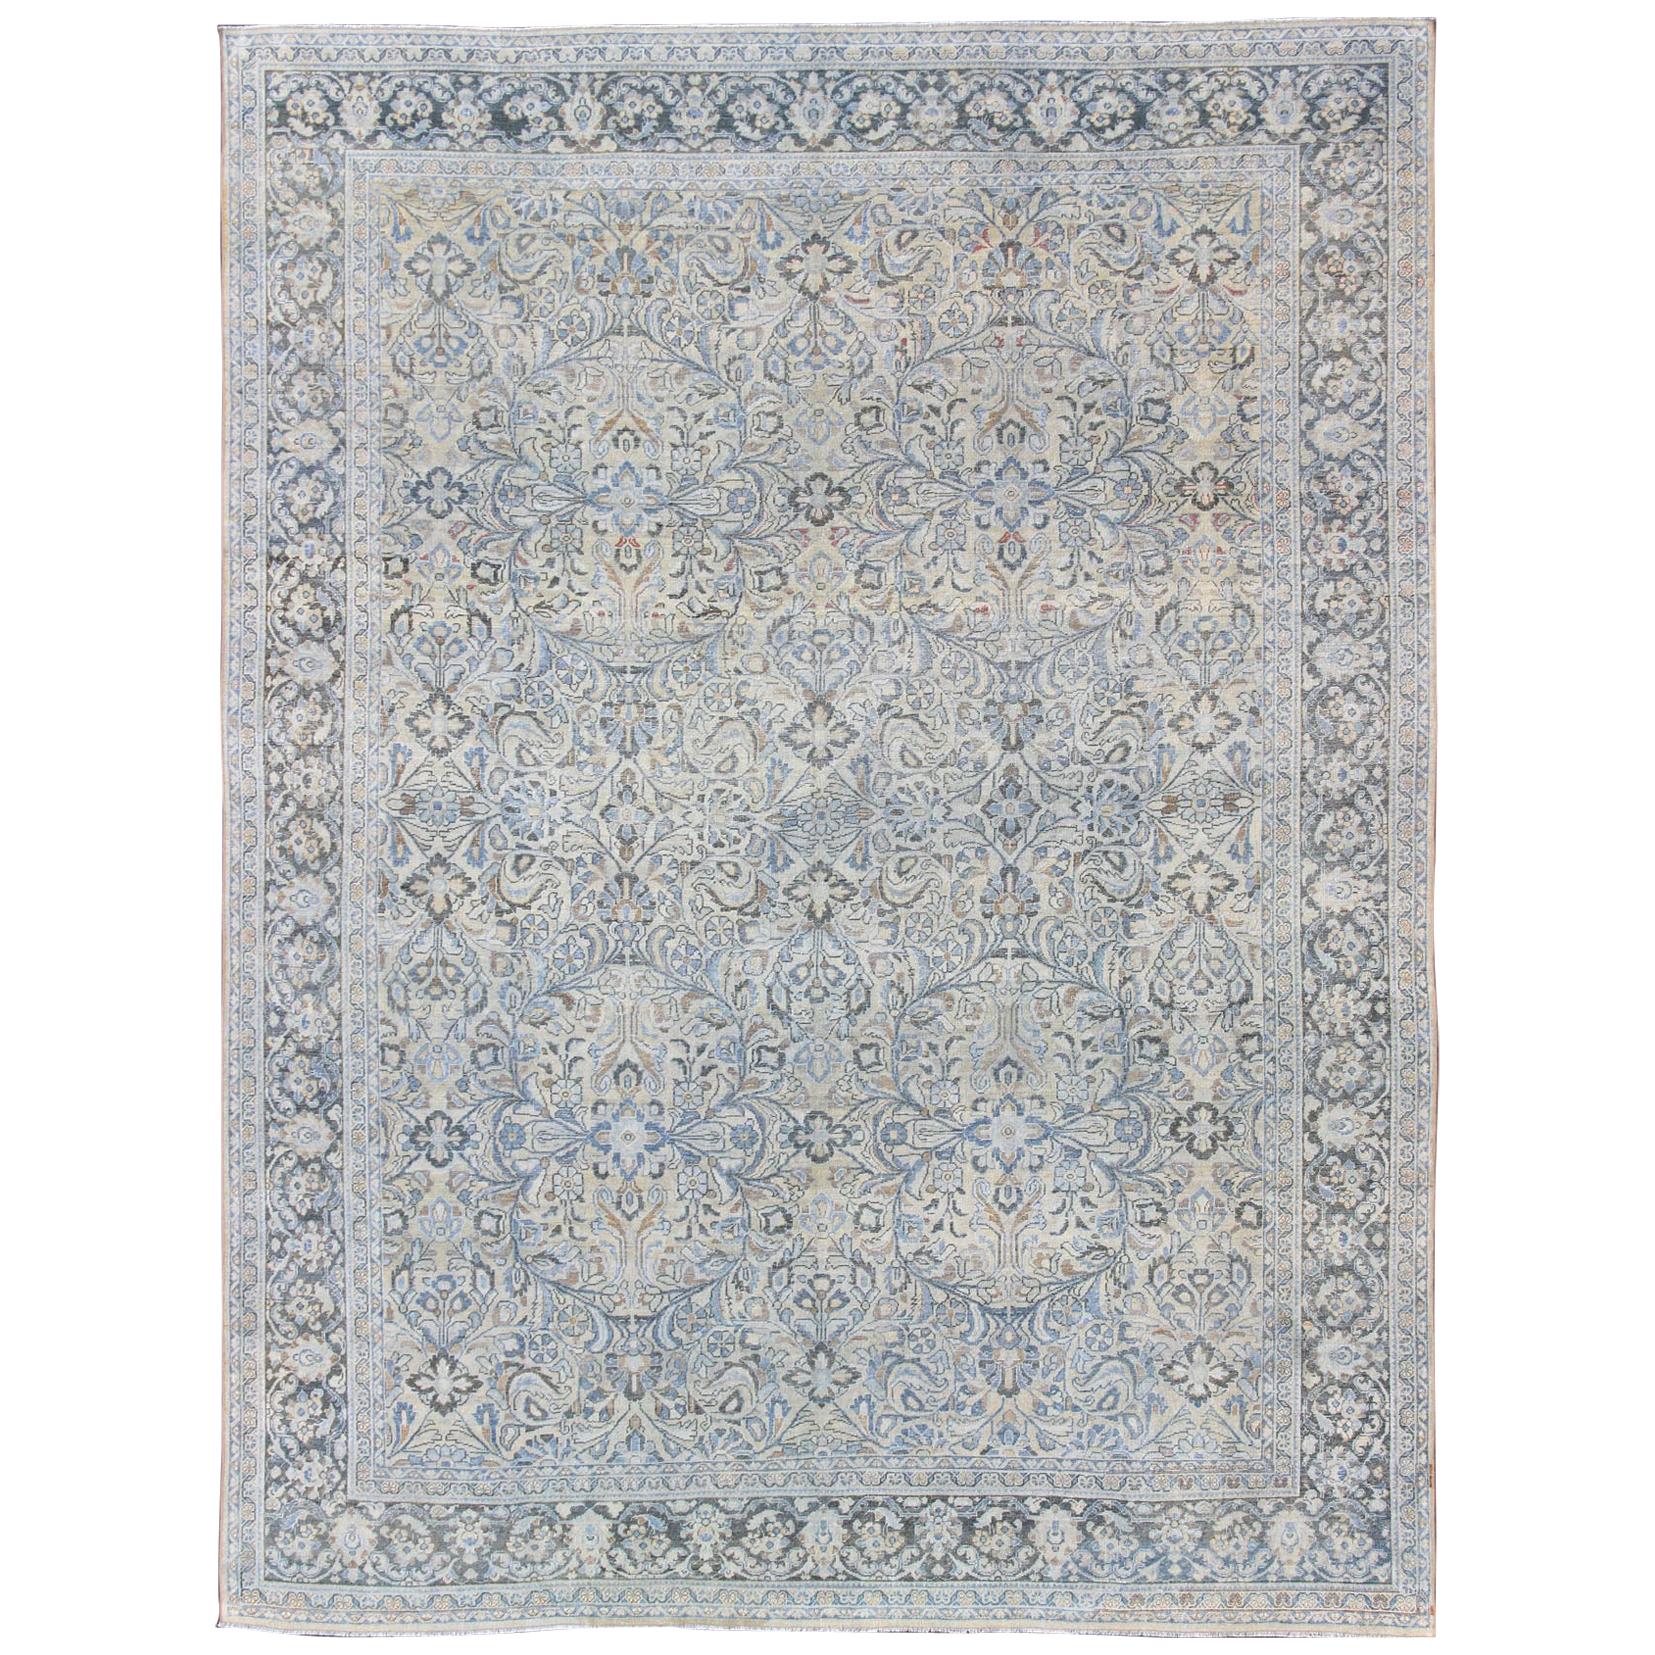 Antique Persian Mahal Rug with Sub Floral Design in Blue, Charcoal & Cream